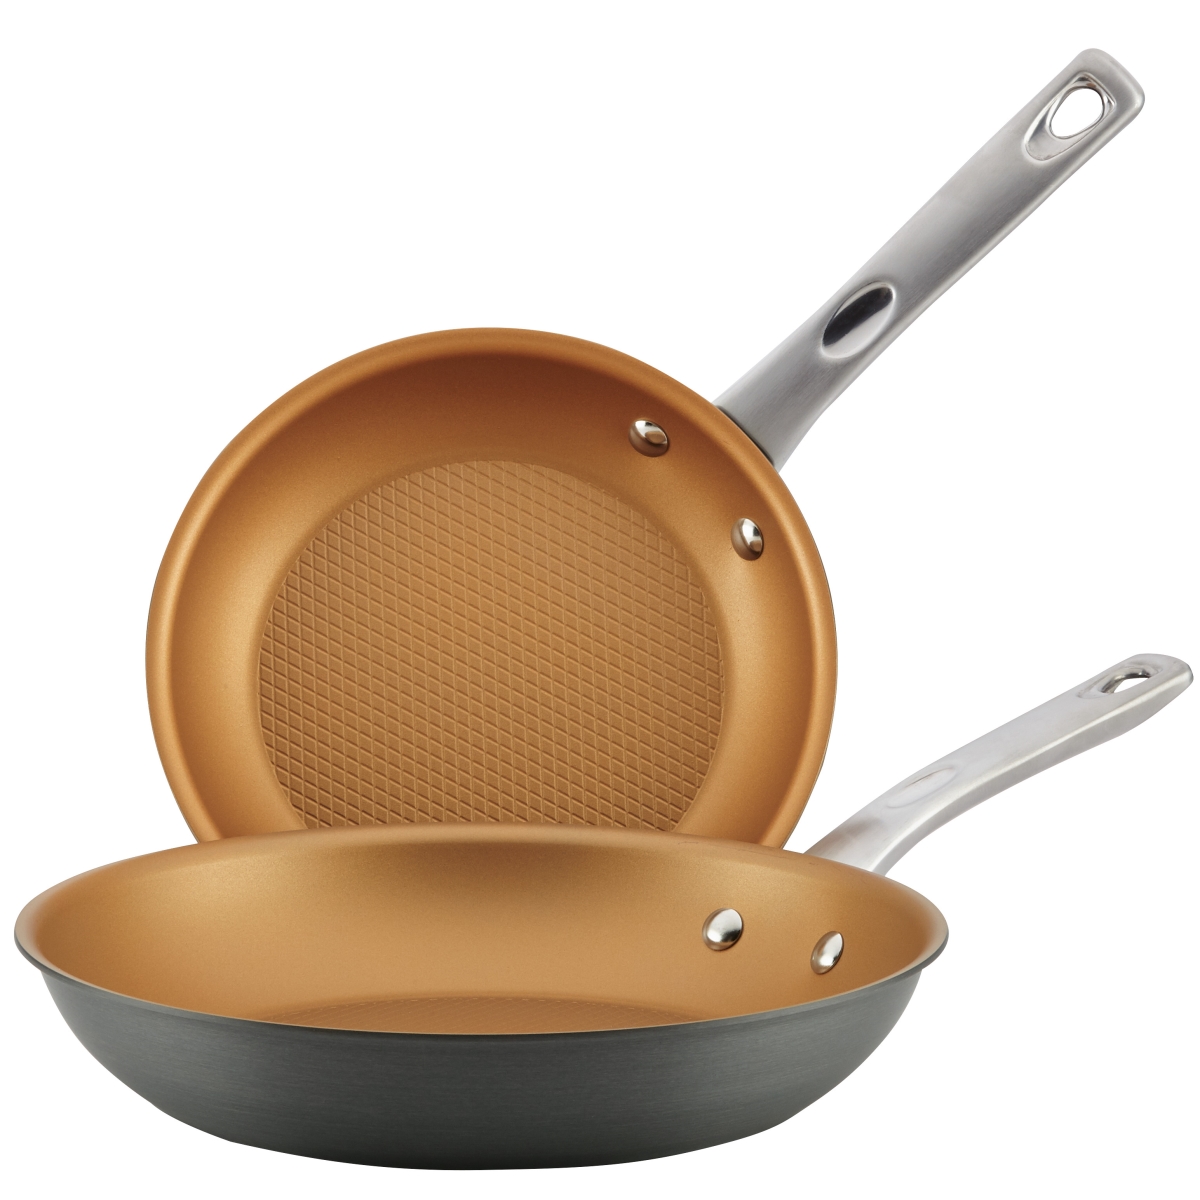 80264 Hard Anodized Aluminum Skillets, 9.25 & 11.5 In. - Pack Of 2